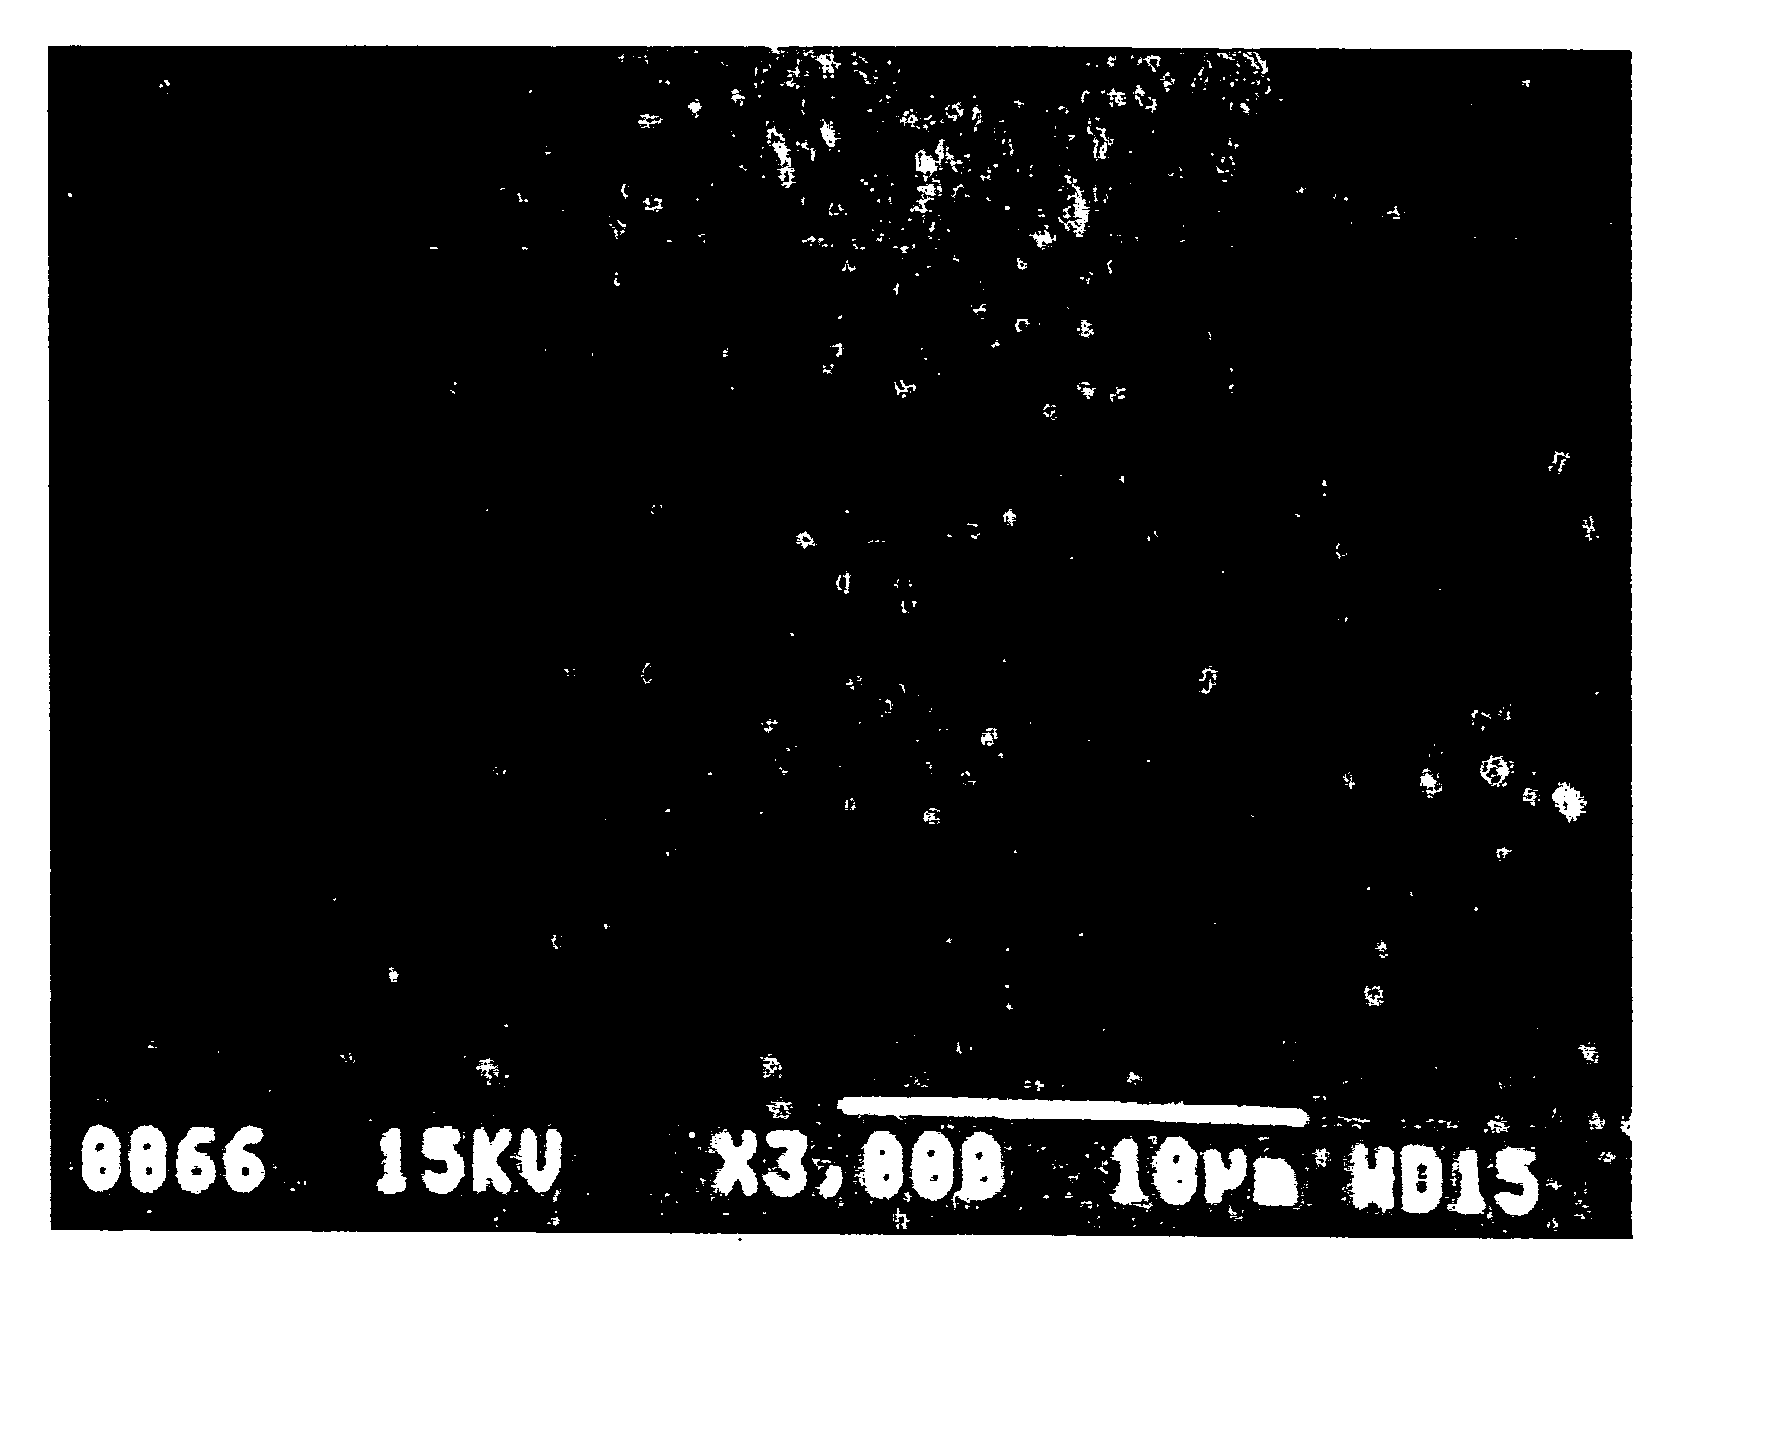 Metal paste and film formation method using the same